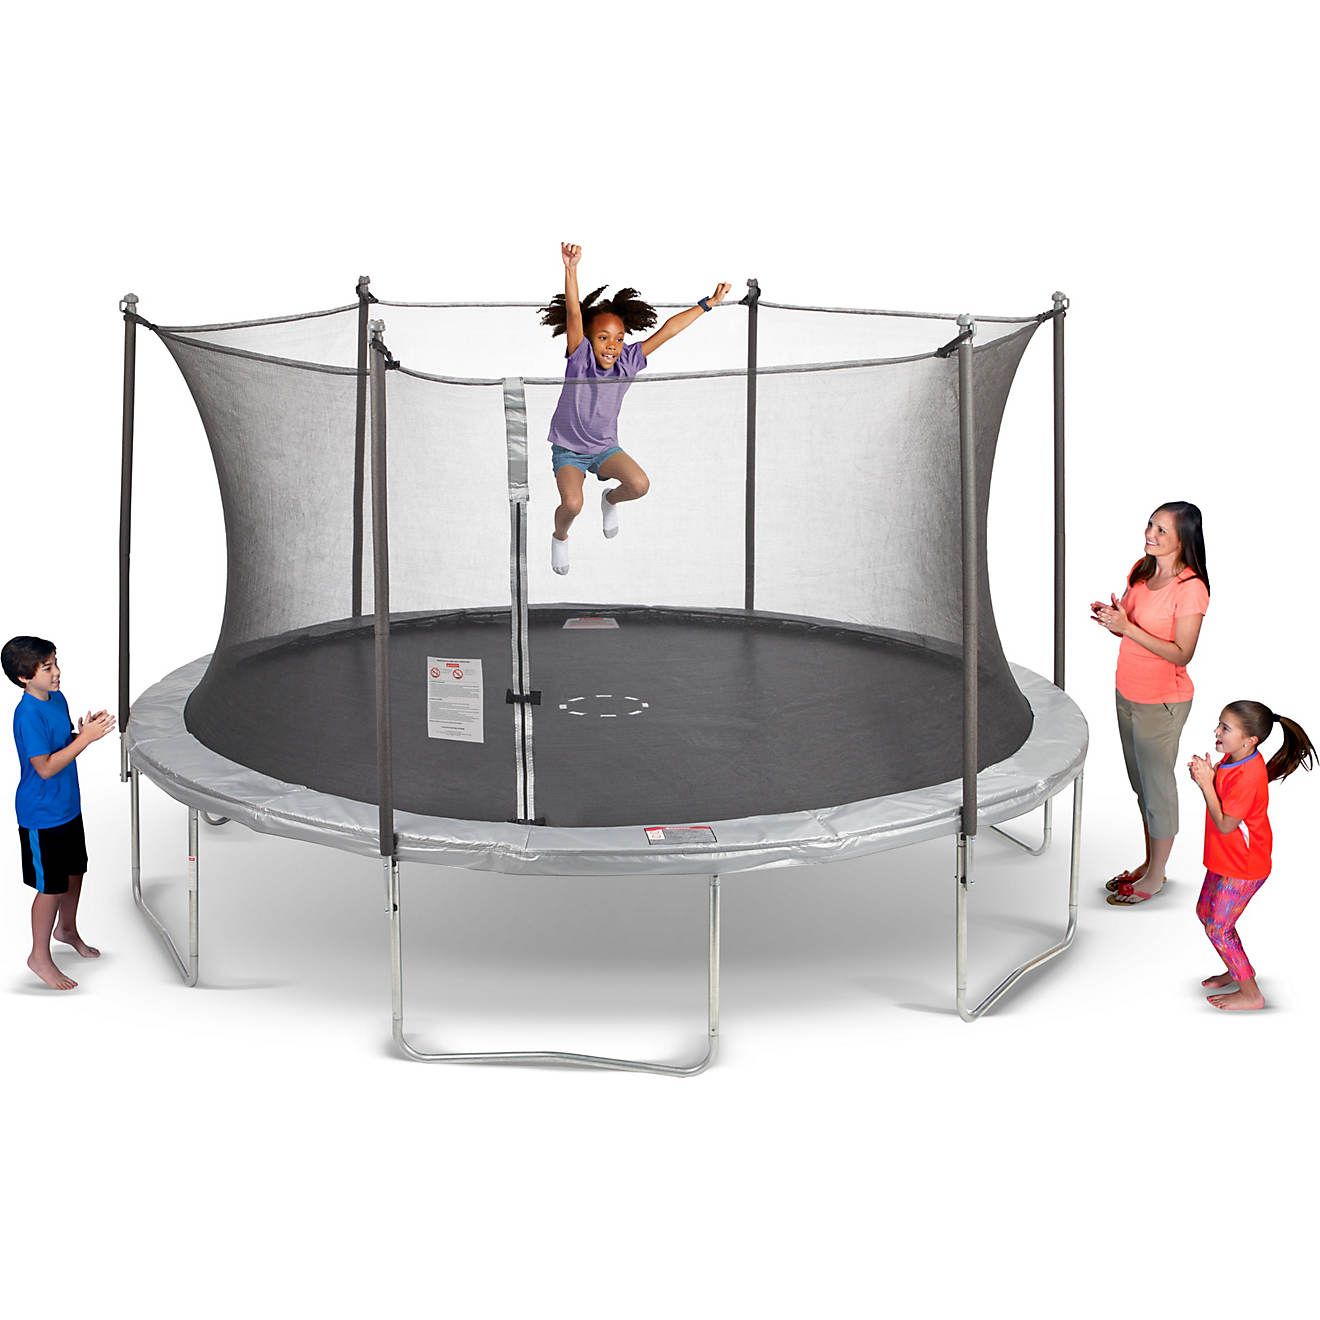 AGame 14 ft Round Trampoline with Enclosure | Academy Sports + Outdoor Affiliate